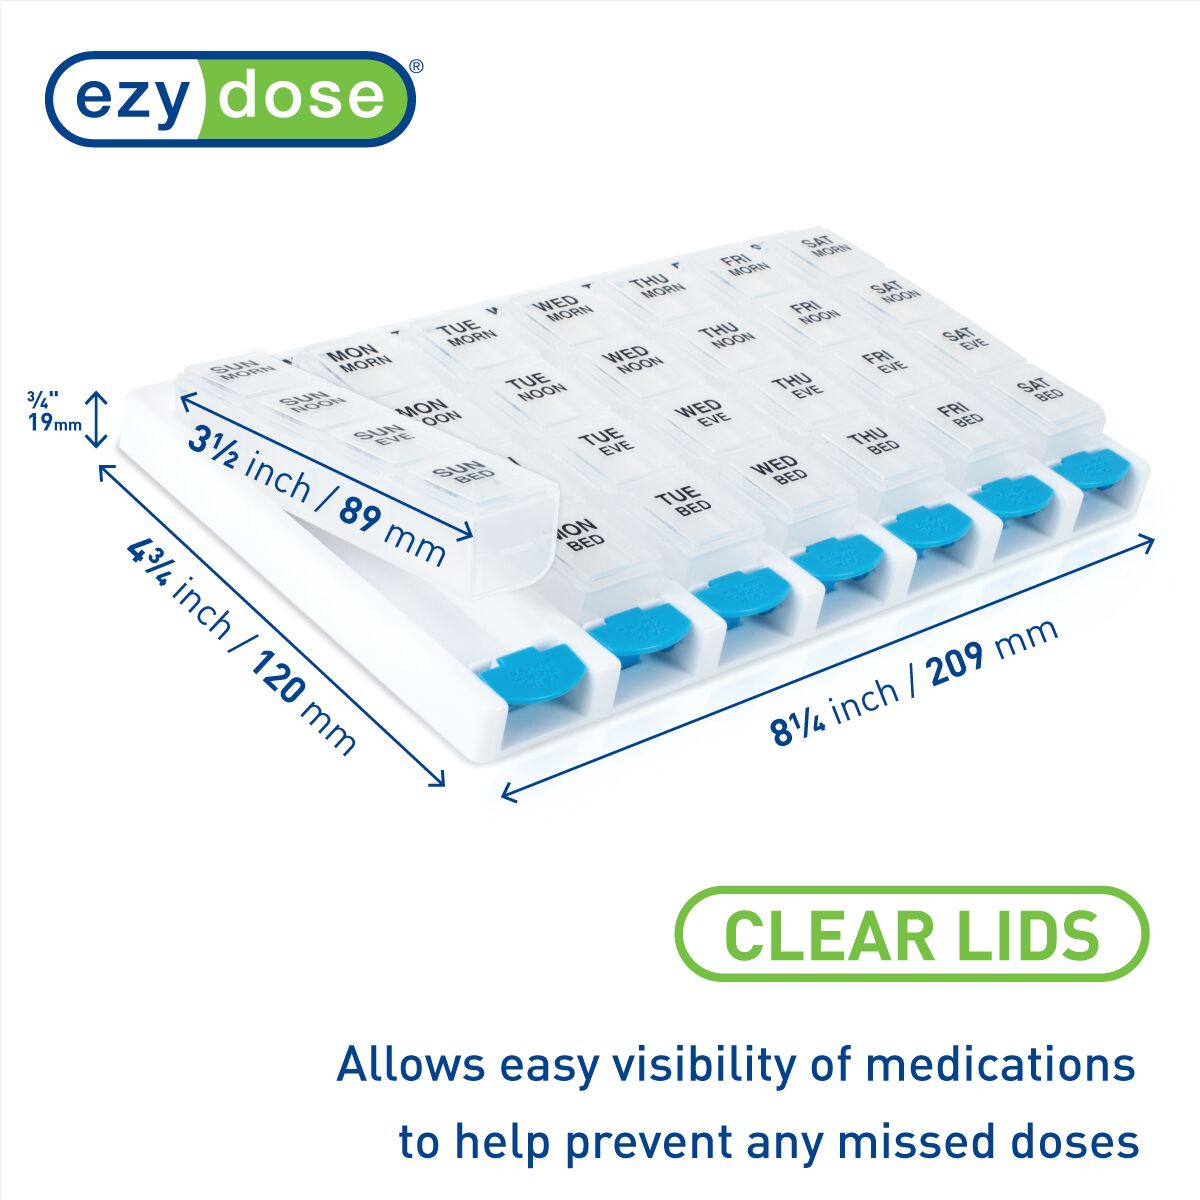 Weekly 4 times a day pill organizer has clear lids which allows visibility of medications to help prevent any missed doses